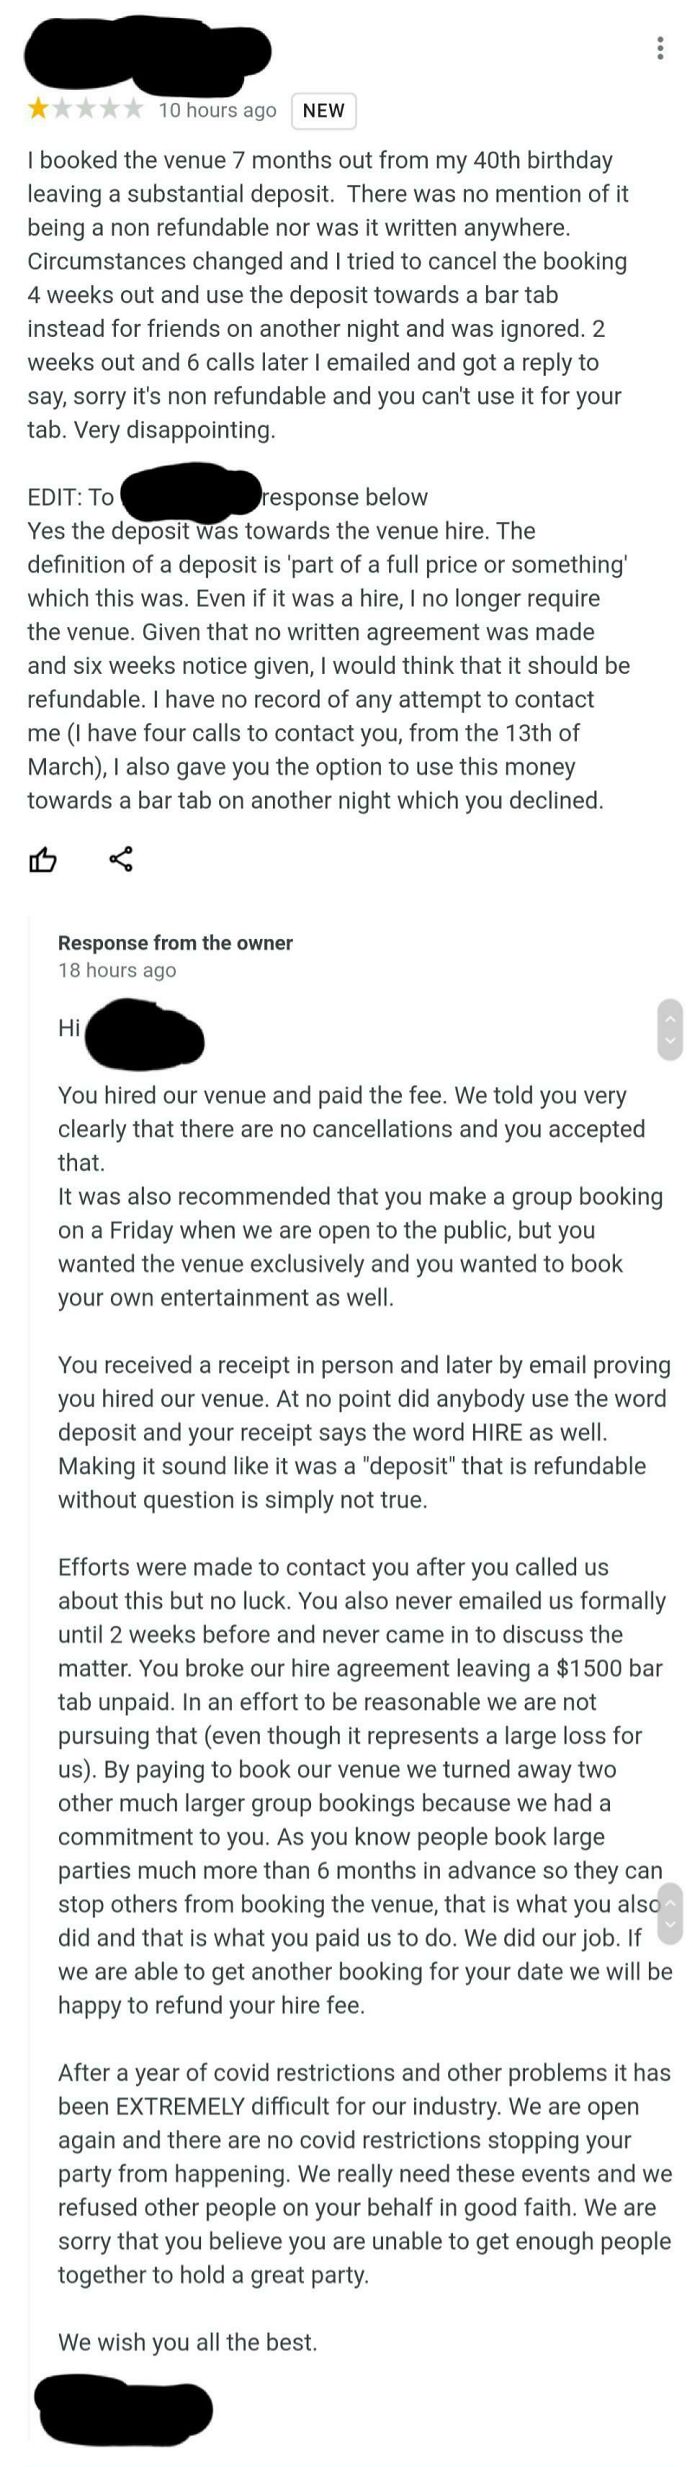 Owner Of A Micro-Brewery Responds To A Review, The Reviewer Doesn't Want To Quit Their Bullshit.